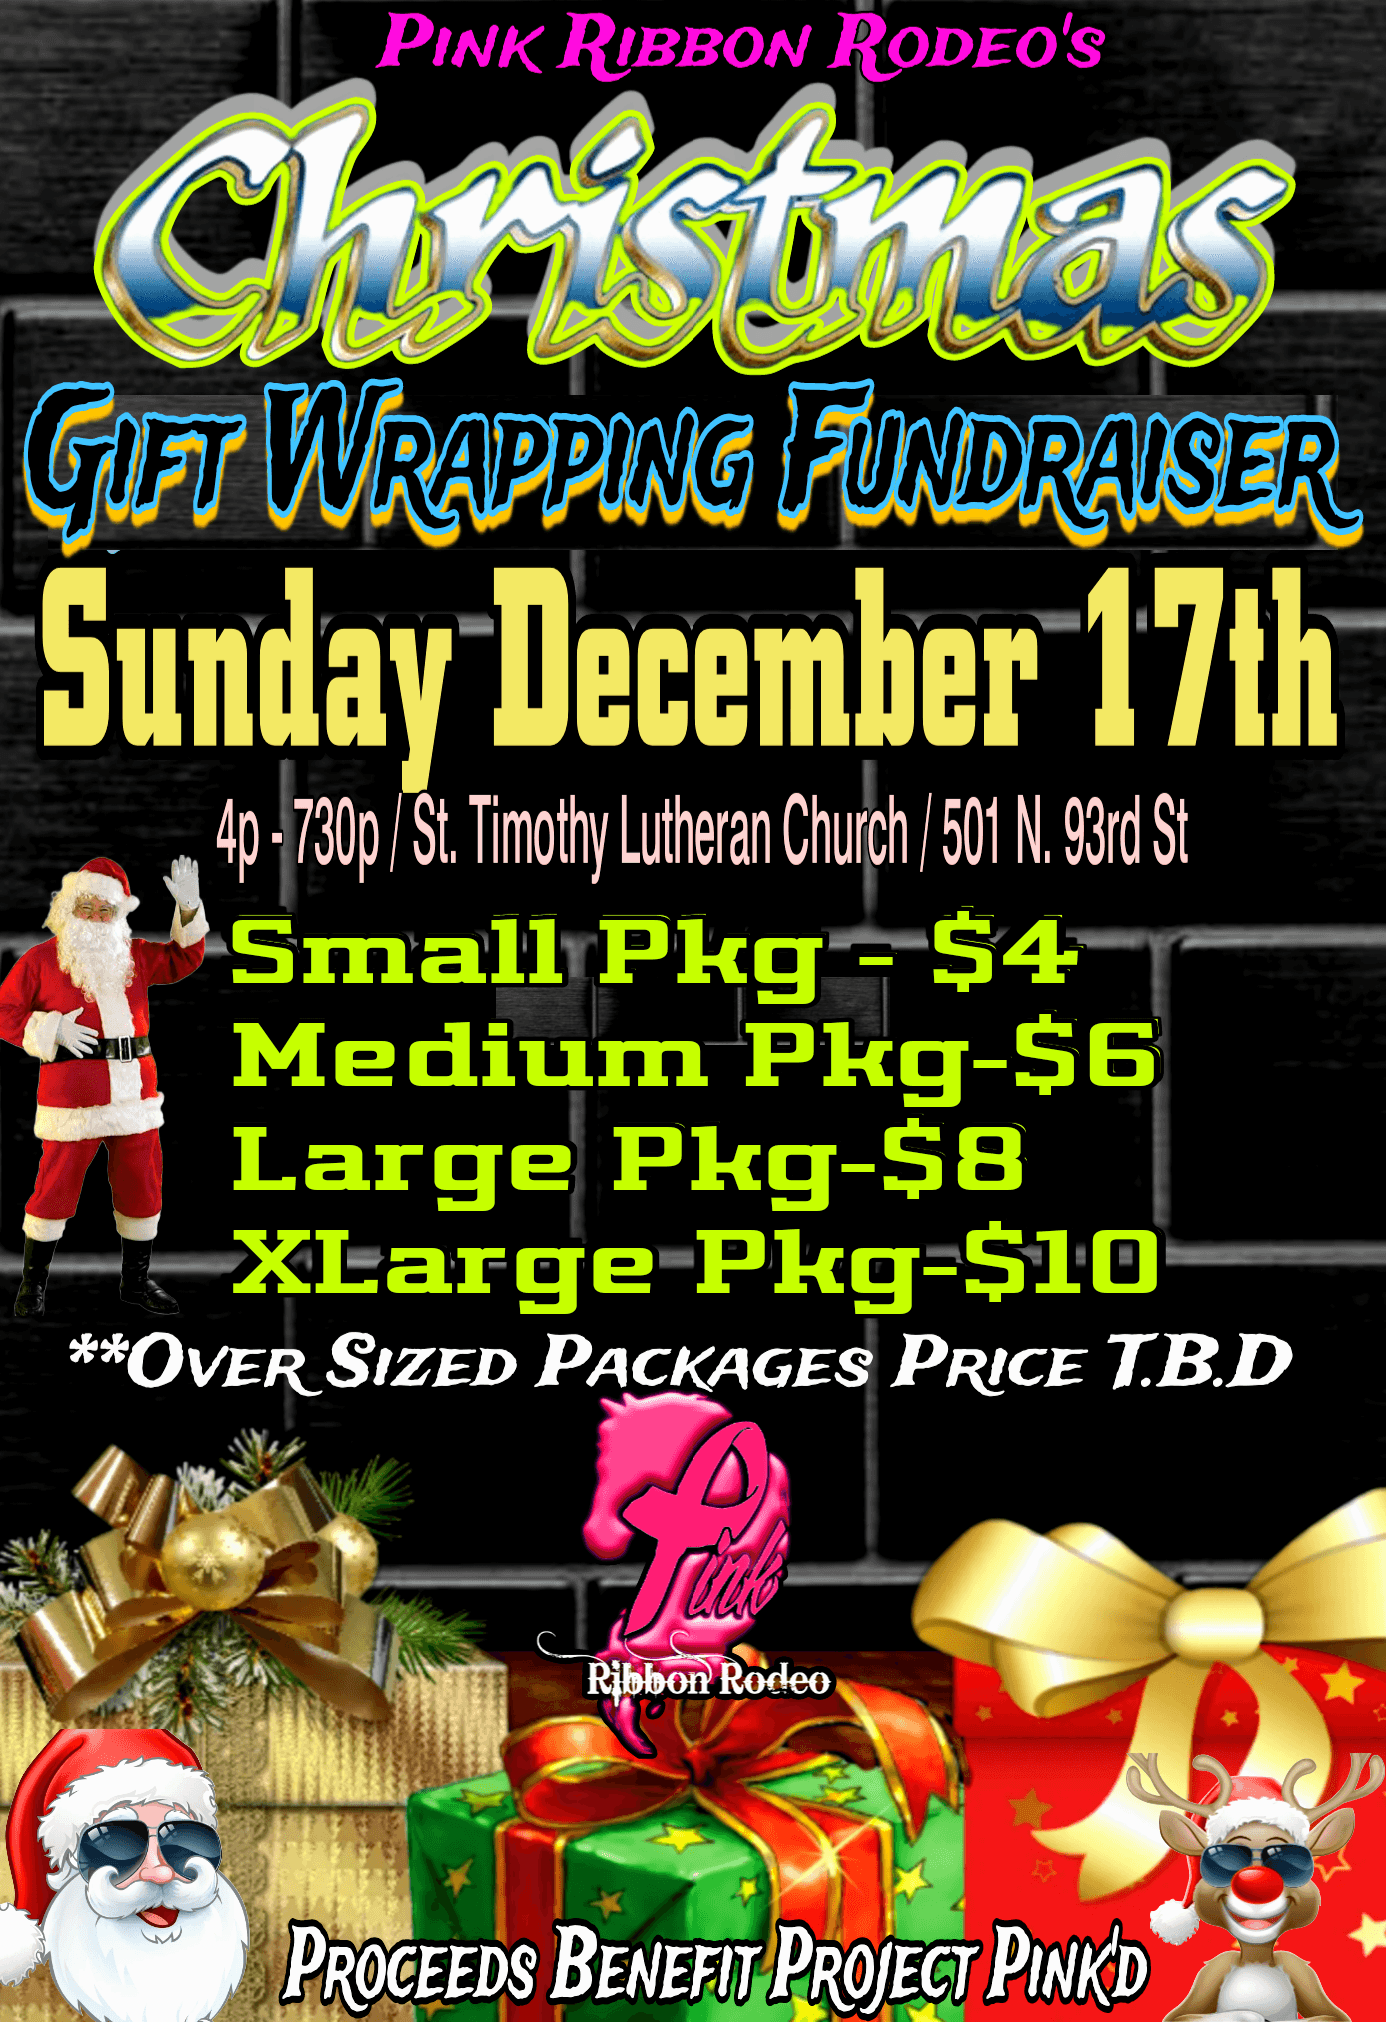 Pink Ribbon Rodeo's Christmas Wrapping Fundraiser